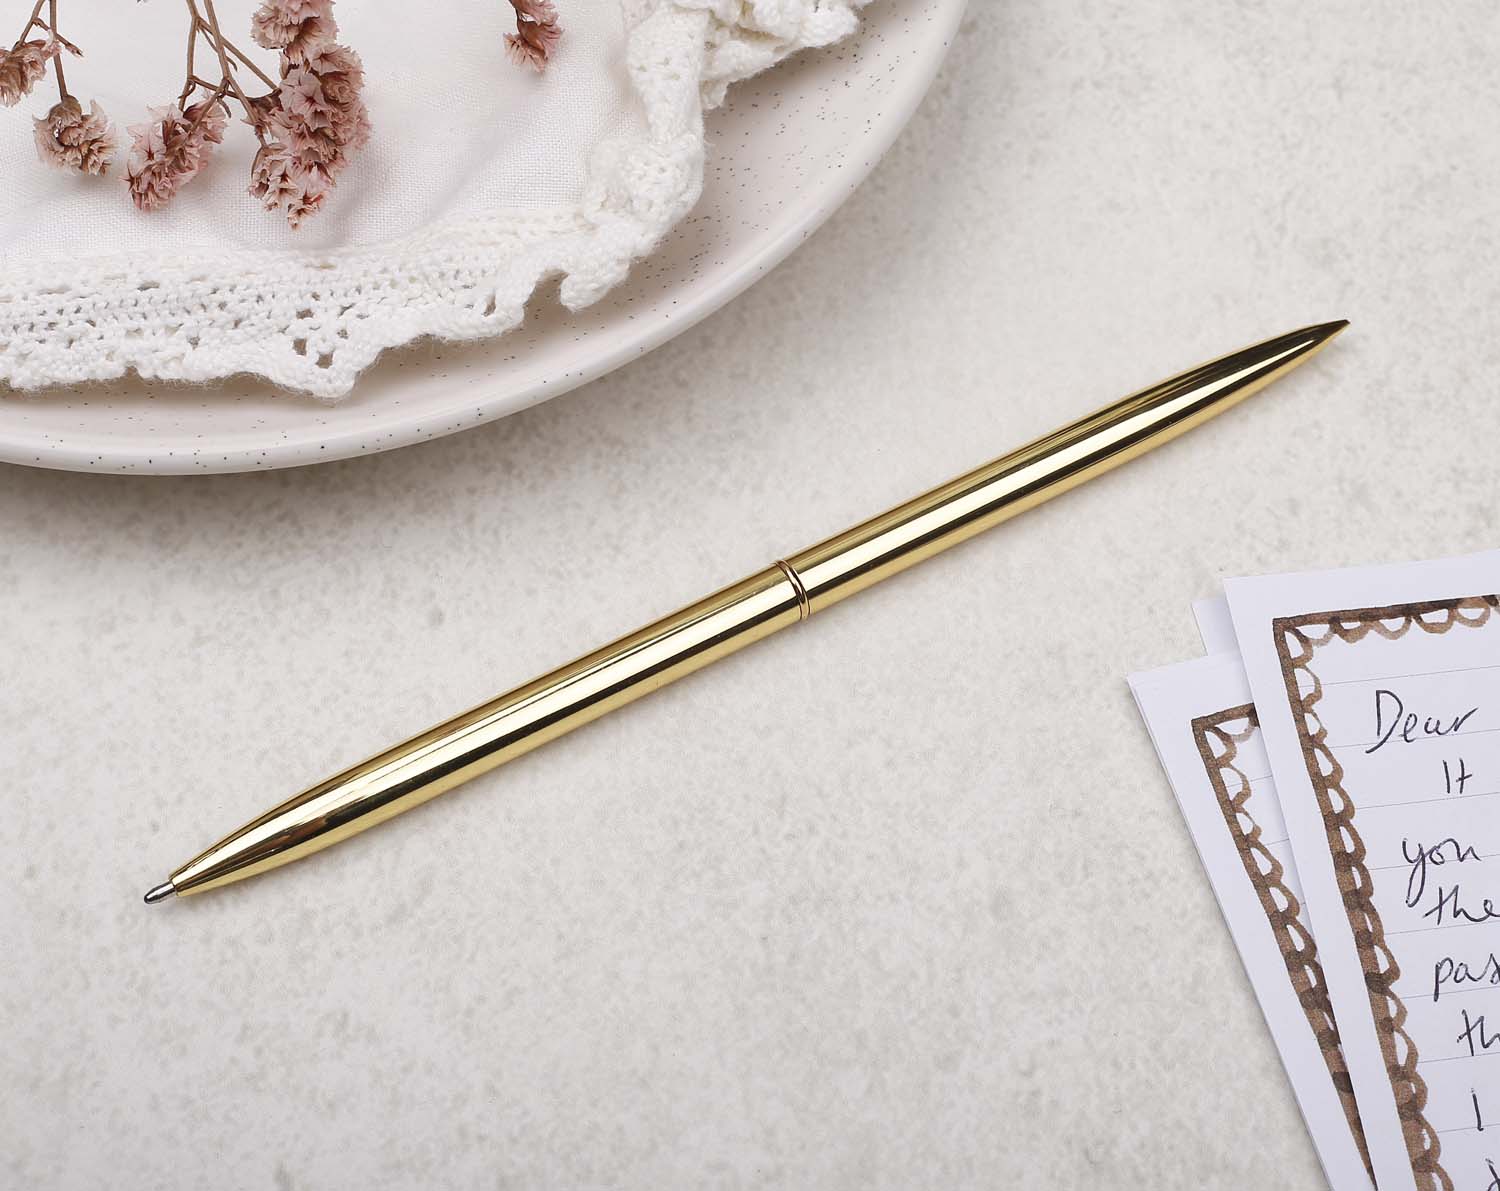 Slim gold metal pen with ballpoint tip and gold detail.